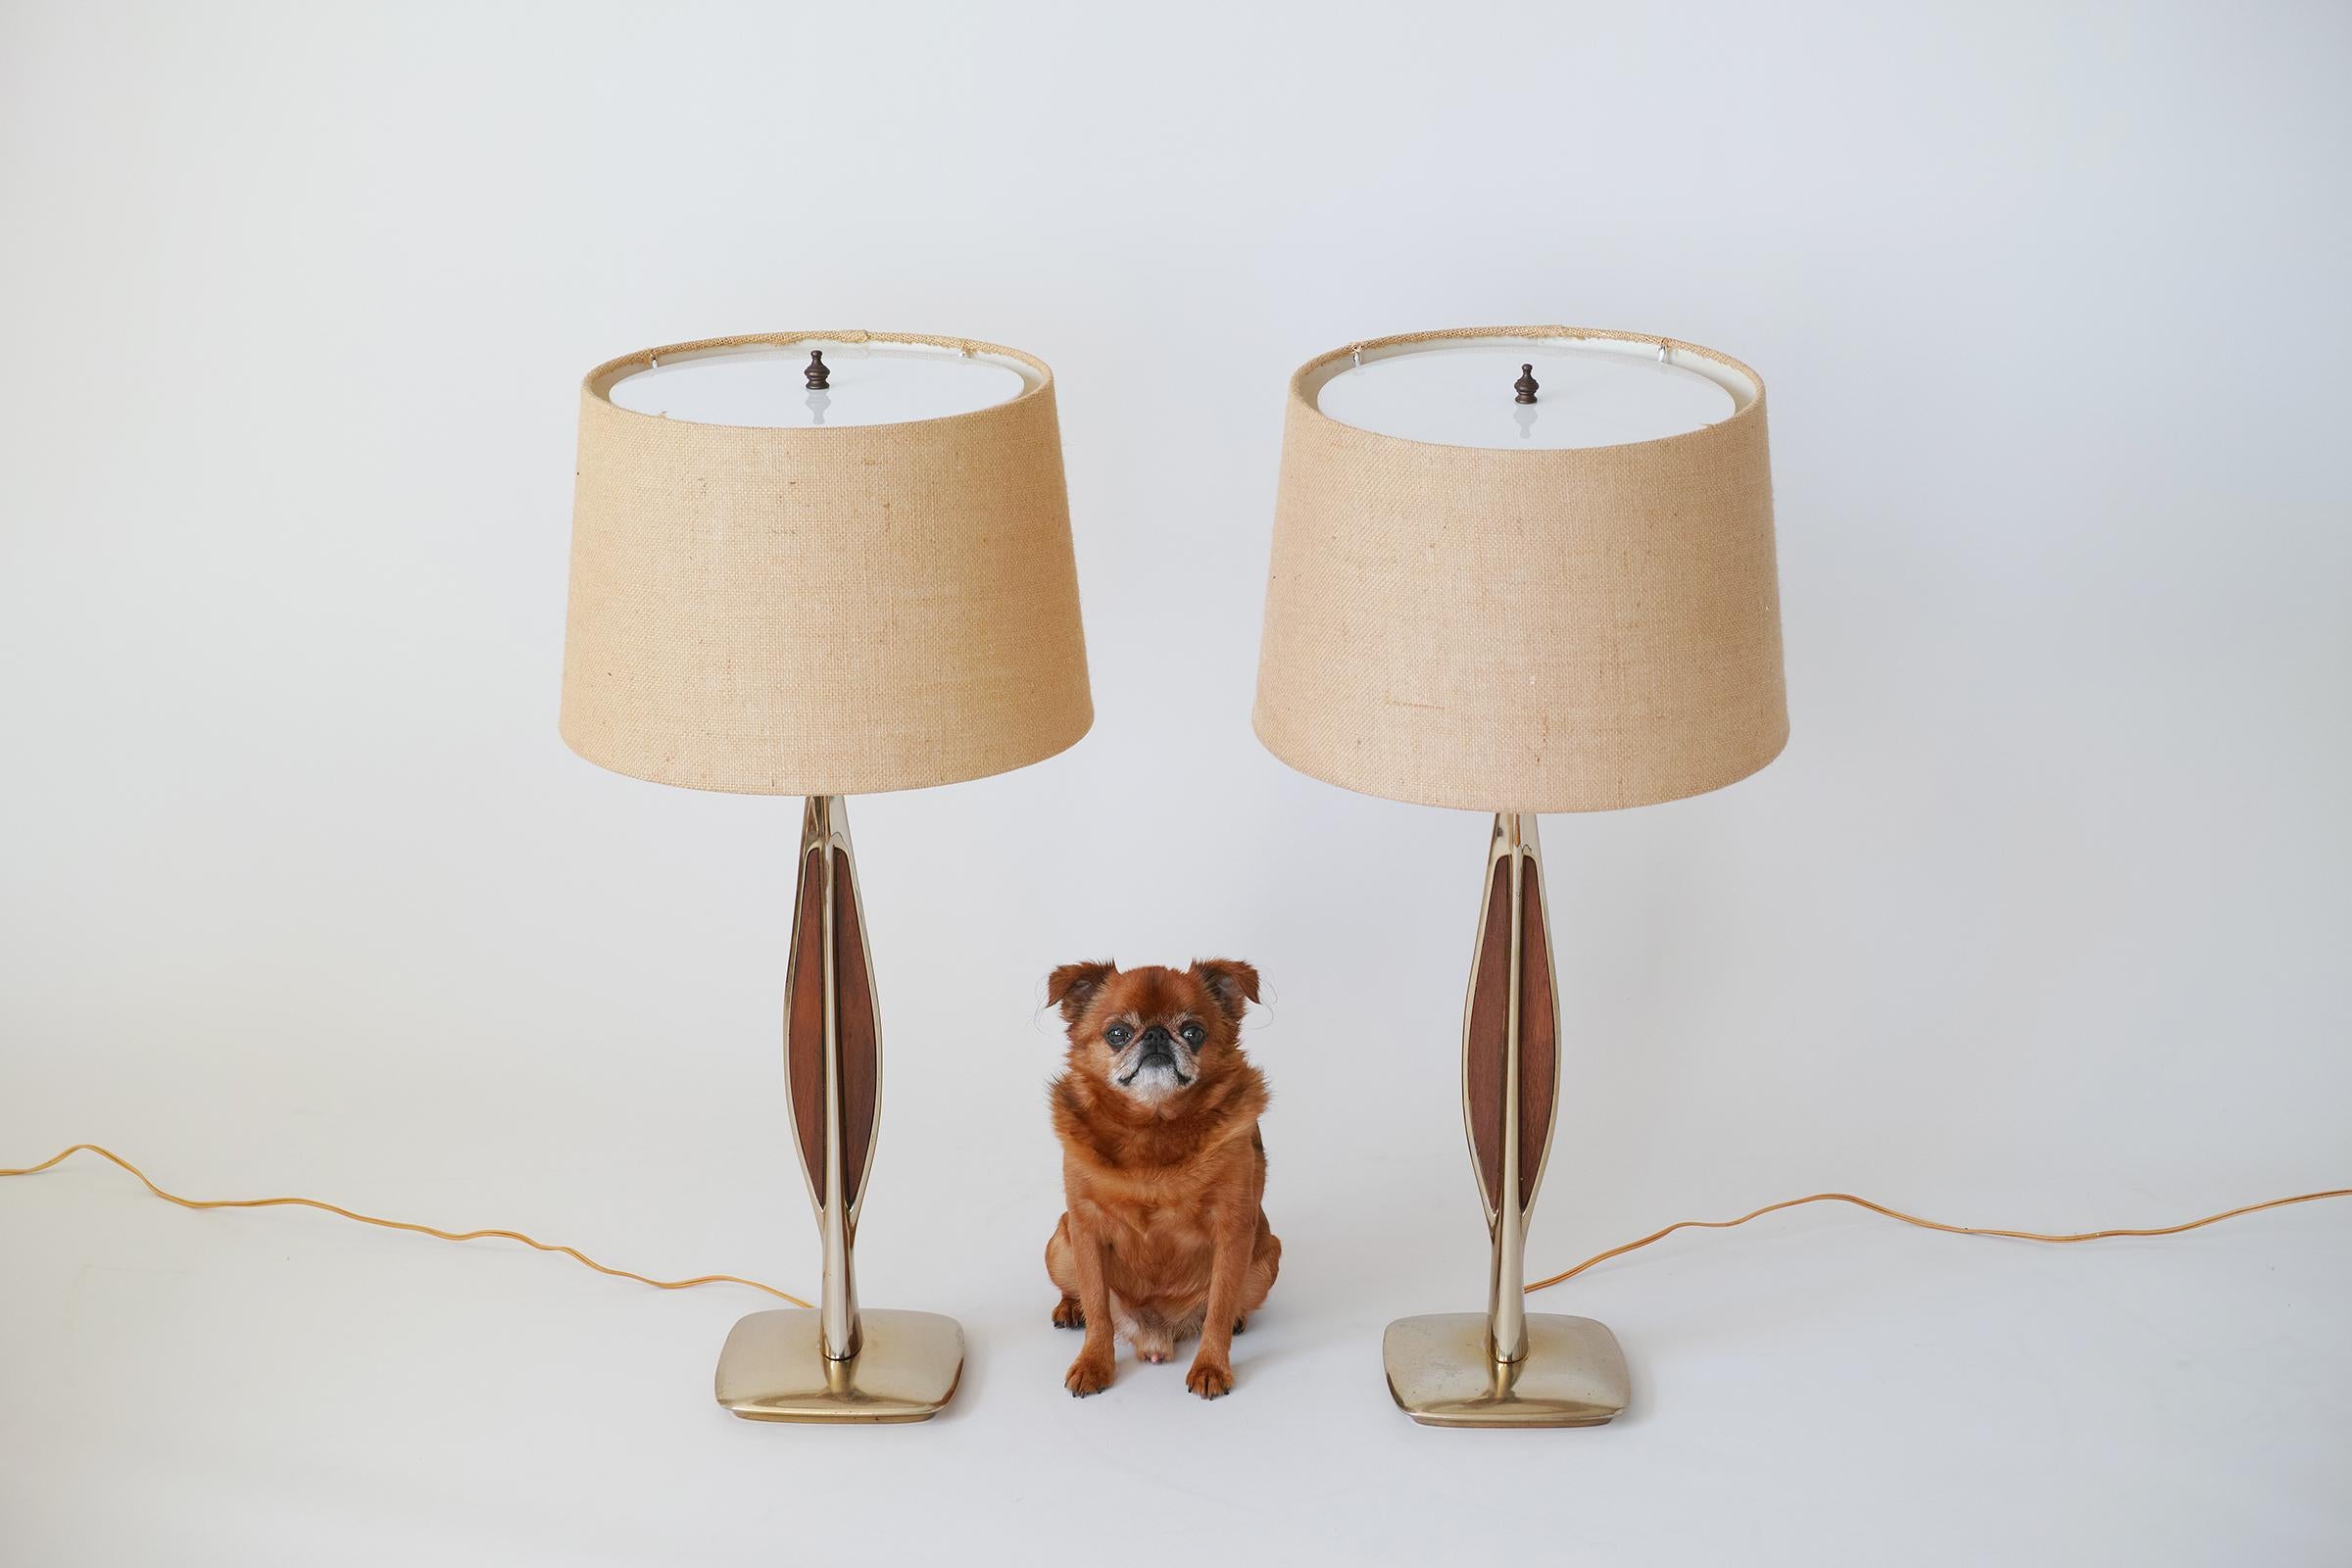 For your consideration is this handsome pair of 1960s Laurel lamps featuring fabric shades with acrylic top diffusers, sculptural brass bases with wood veneer inlays, and 3-way sockets. Handsome midcentury style and in good working order.